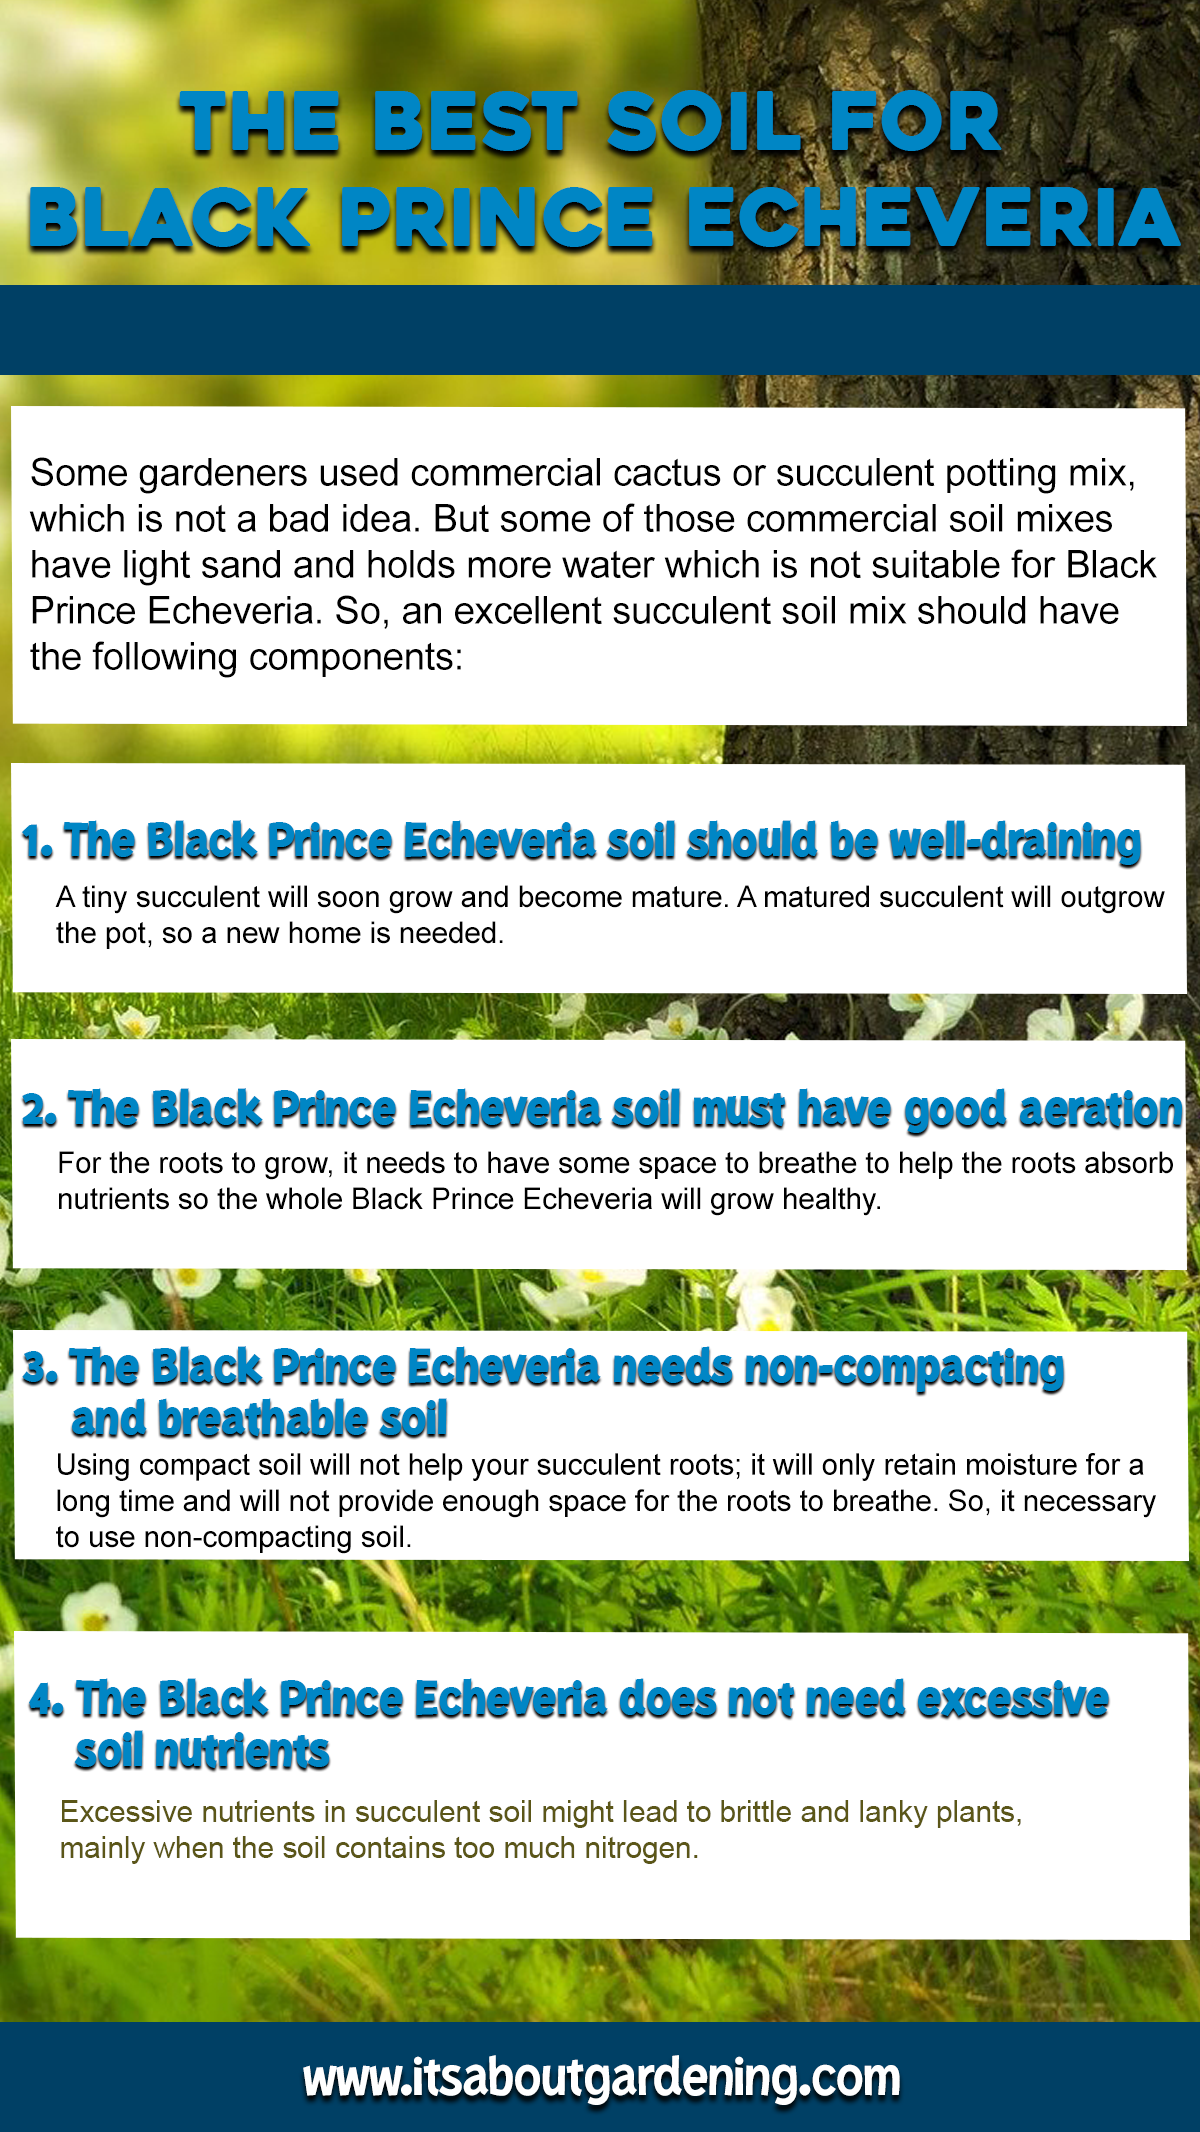 The Best Soil for Black Prince Echeveria Infographic